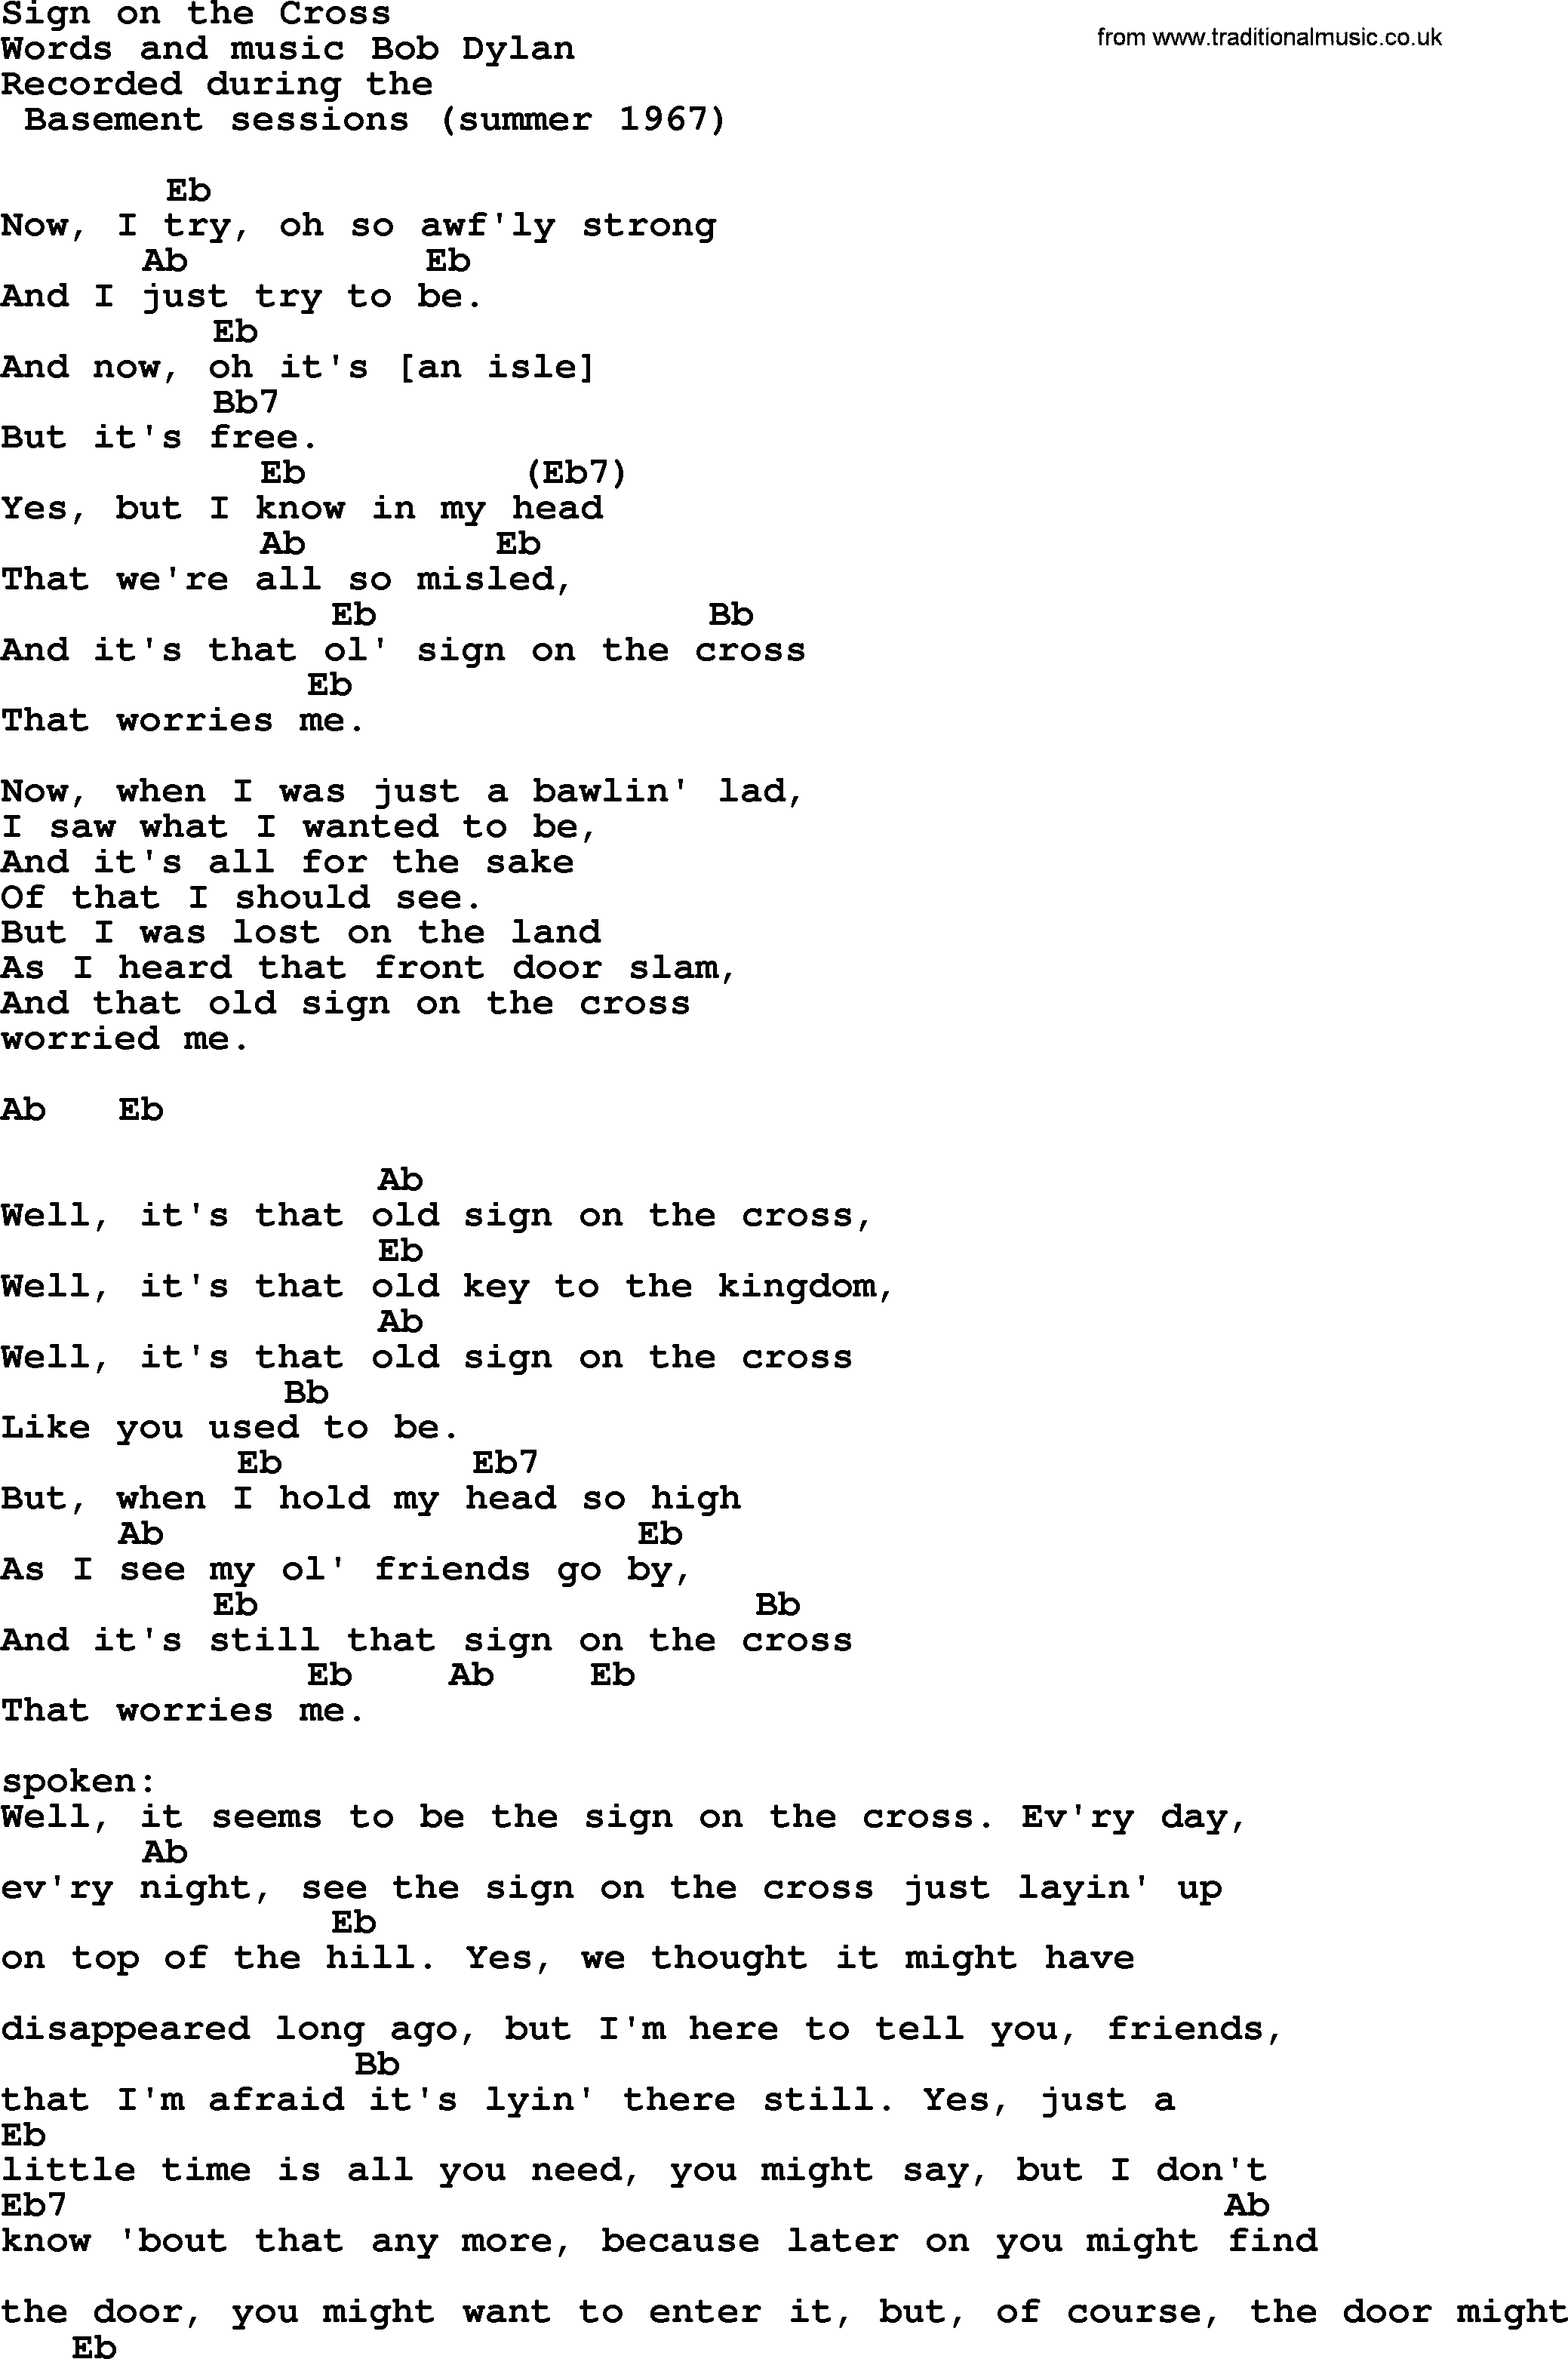 Bob Dylan song, lyrics with chords - Sign on the Cross